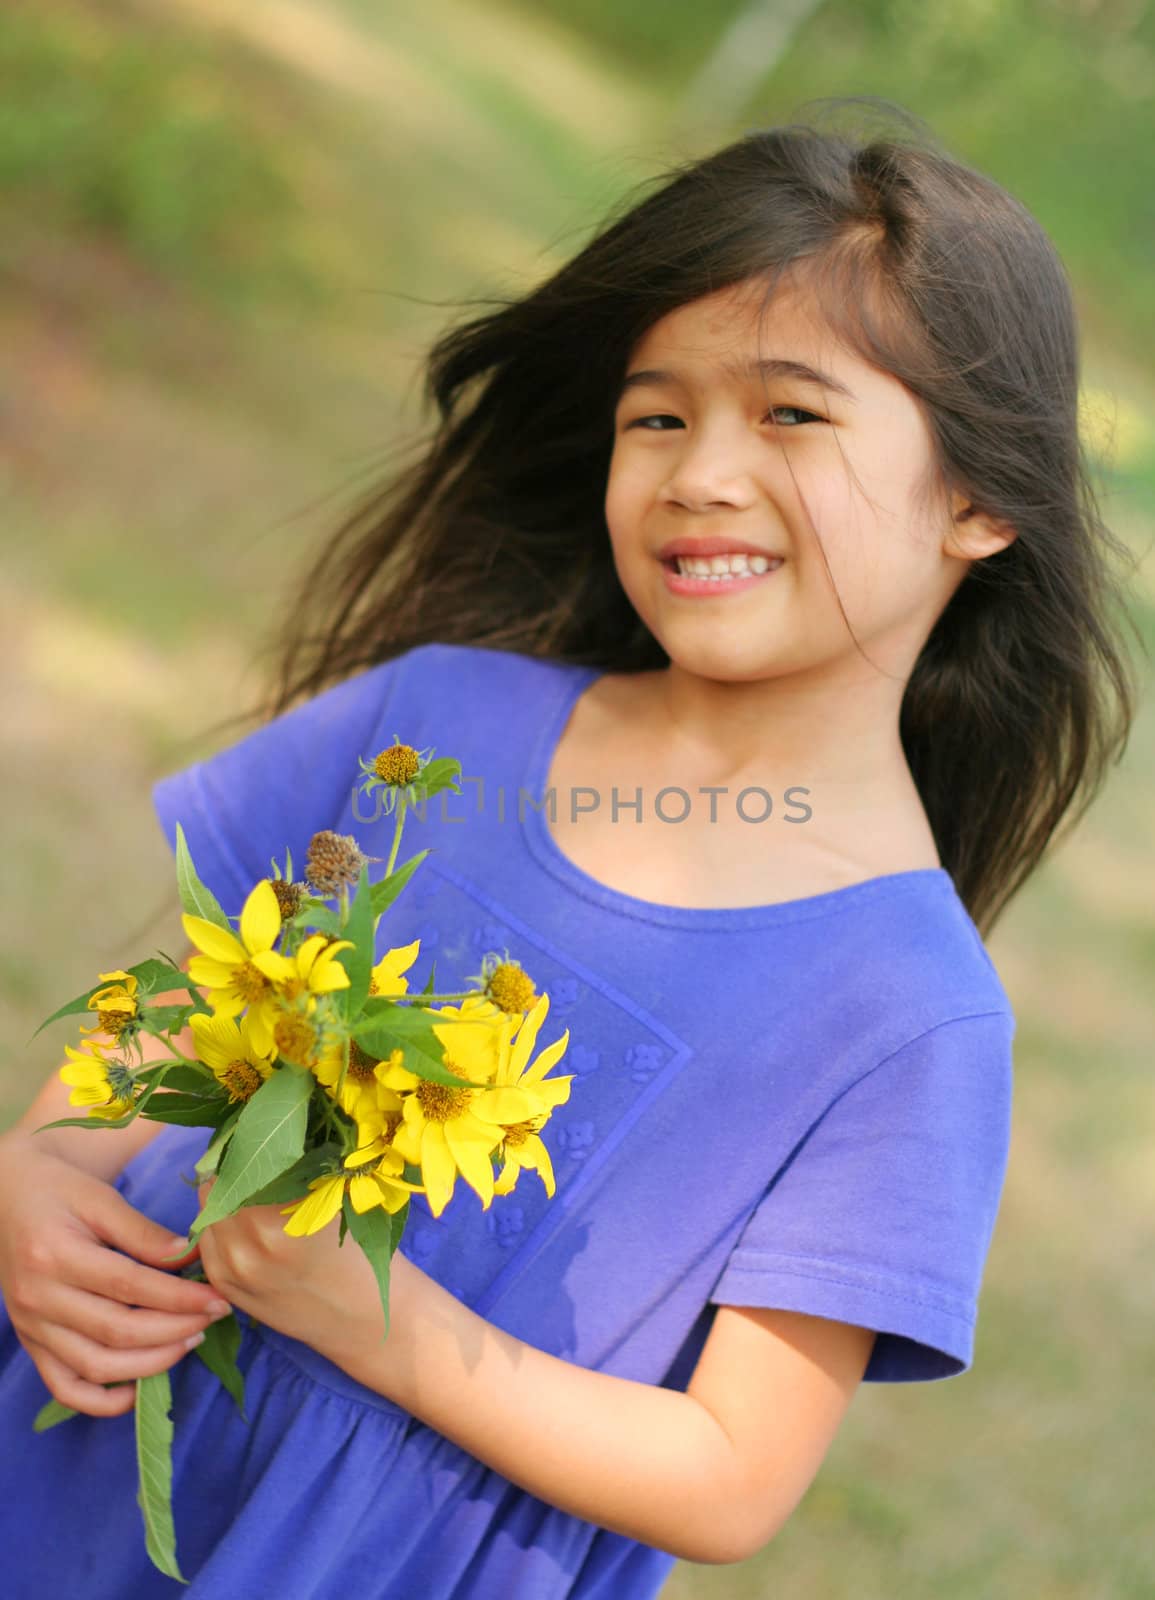 Adorable six year old Girl holding bouquet of sunflowers